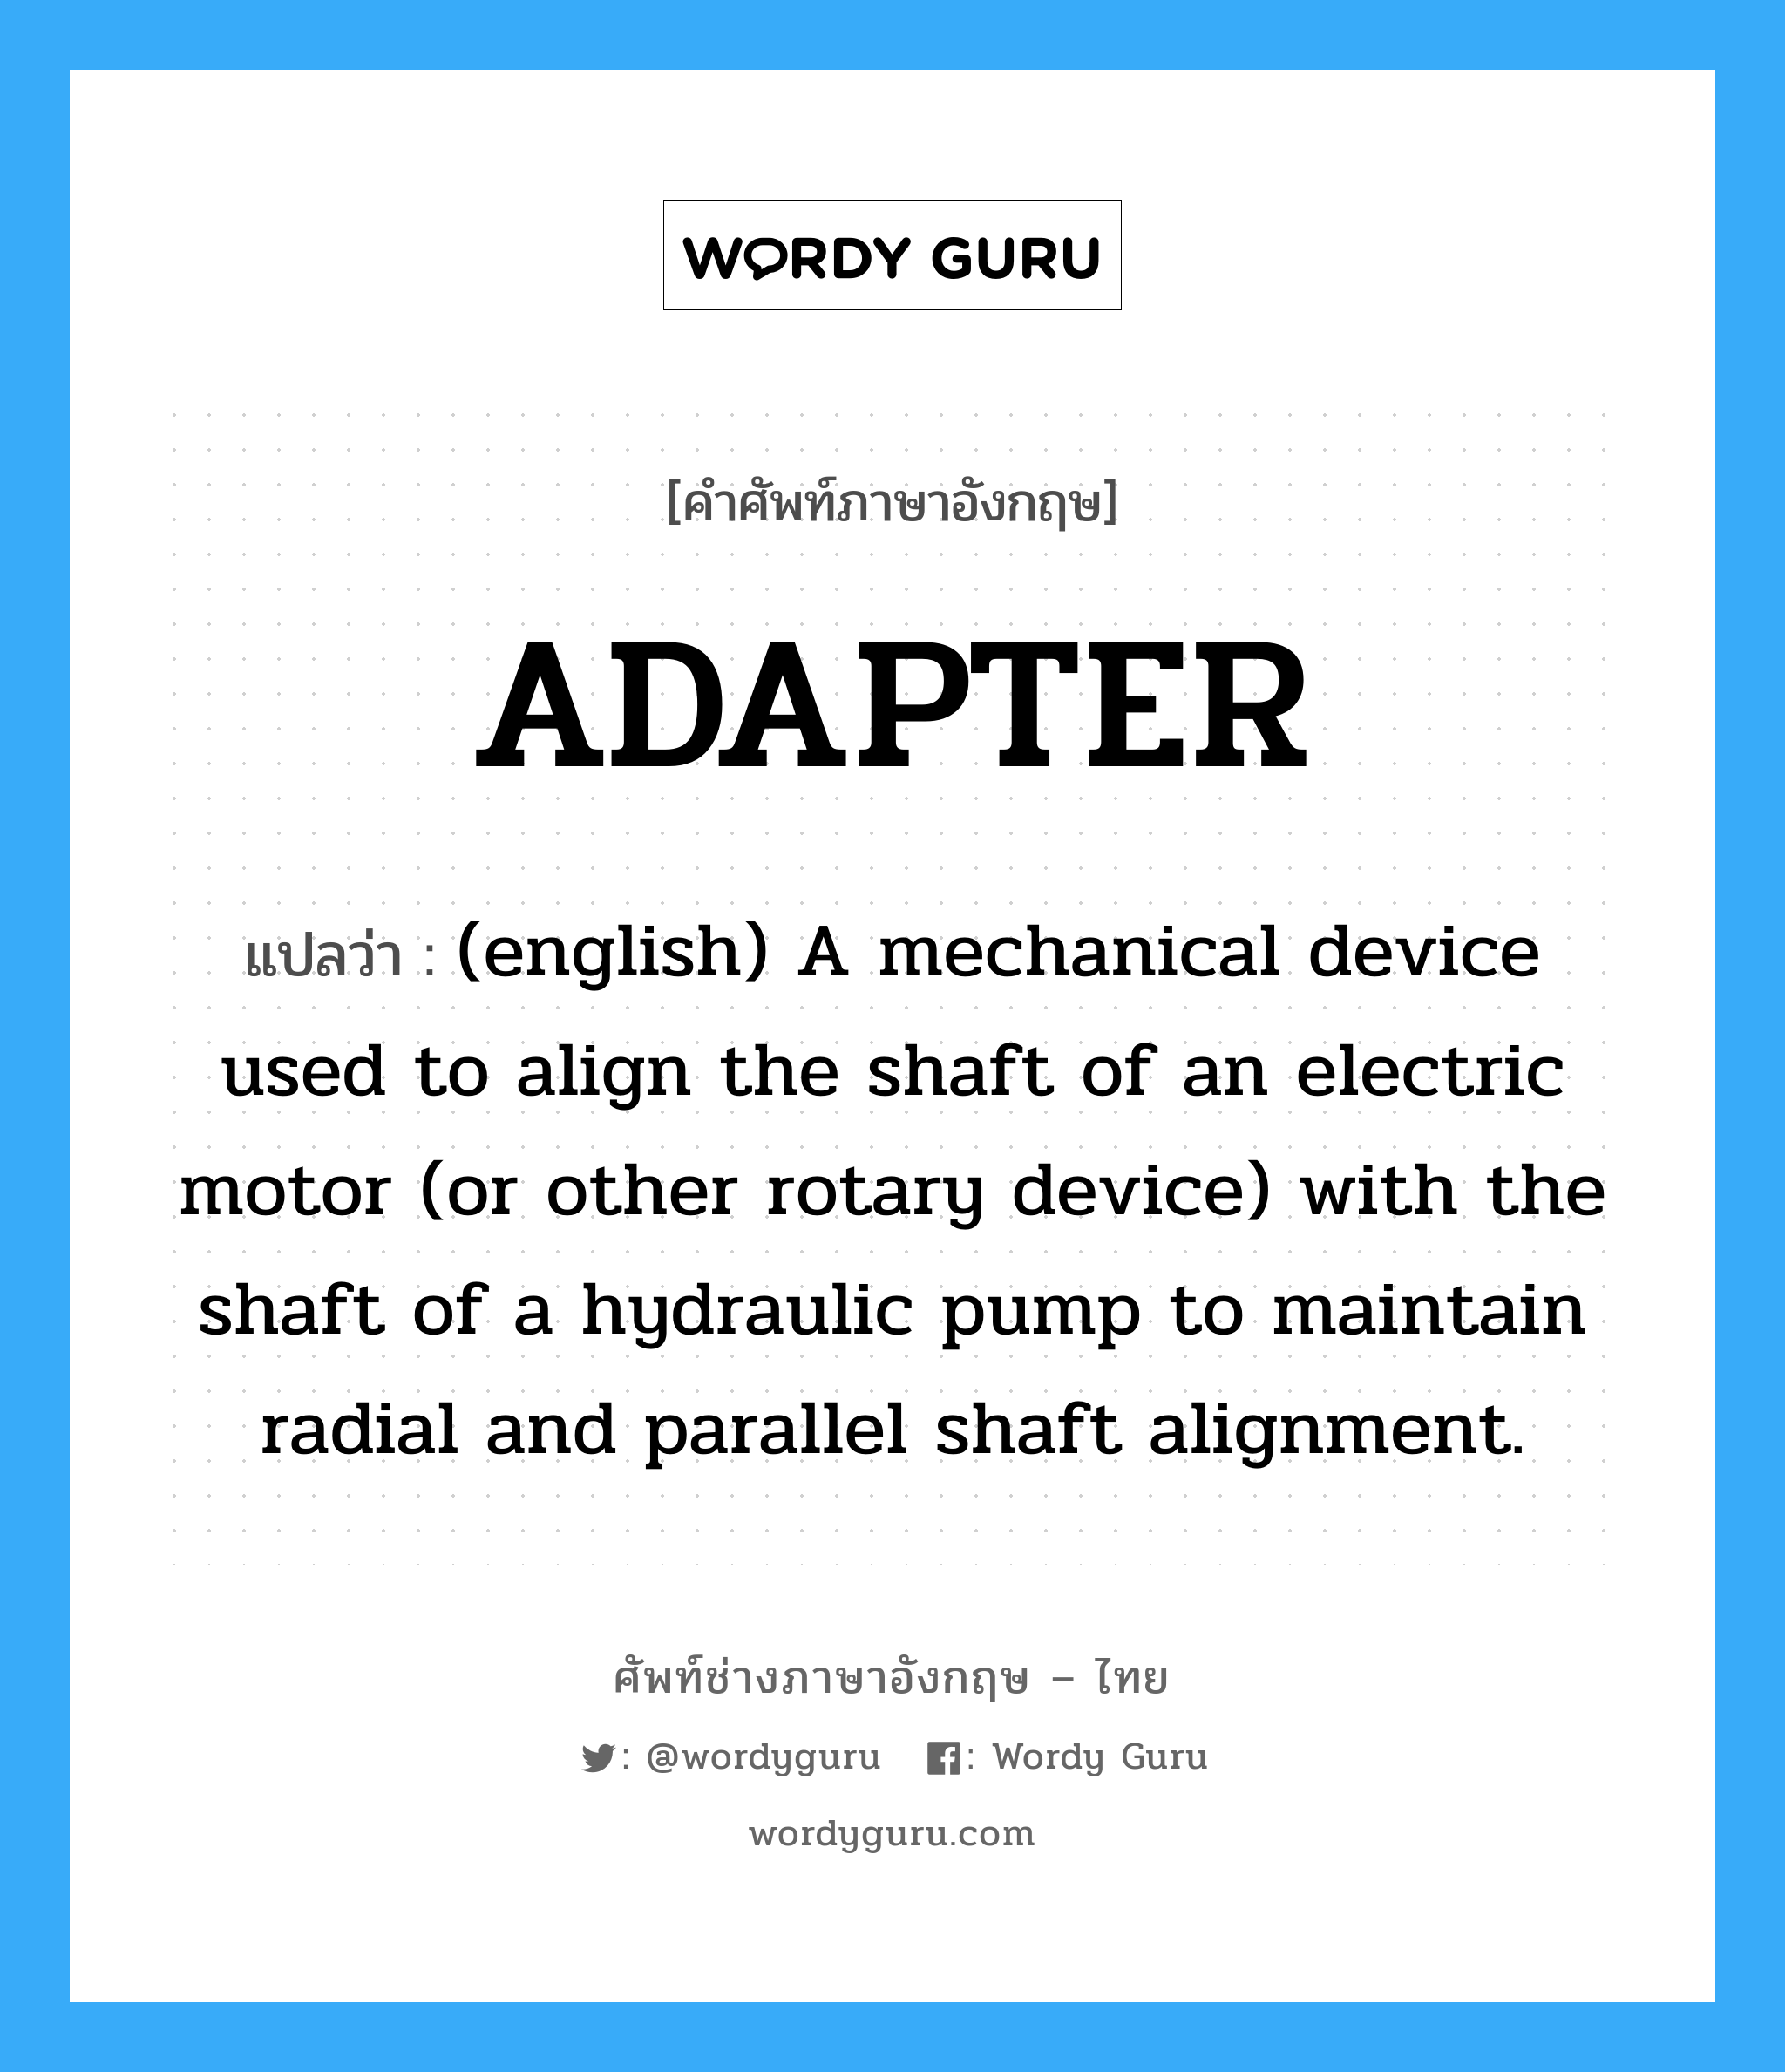 ADAPTER แปลว่า?, คำศัพท์ช่างภาษาอังกฤษ - ไทย ADAPTER คำศัพท์ภาษาอังกฤษ ADAPTER แปลว่า (english) A mechanical device used to align the shaft of an electric motor (or other rotary device) with the shaft of a hydraulic pump to maintain radial and parallel shaft alignment.